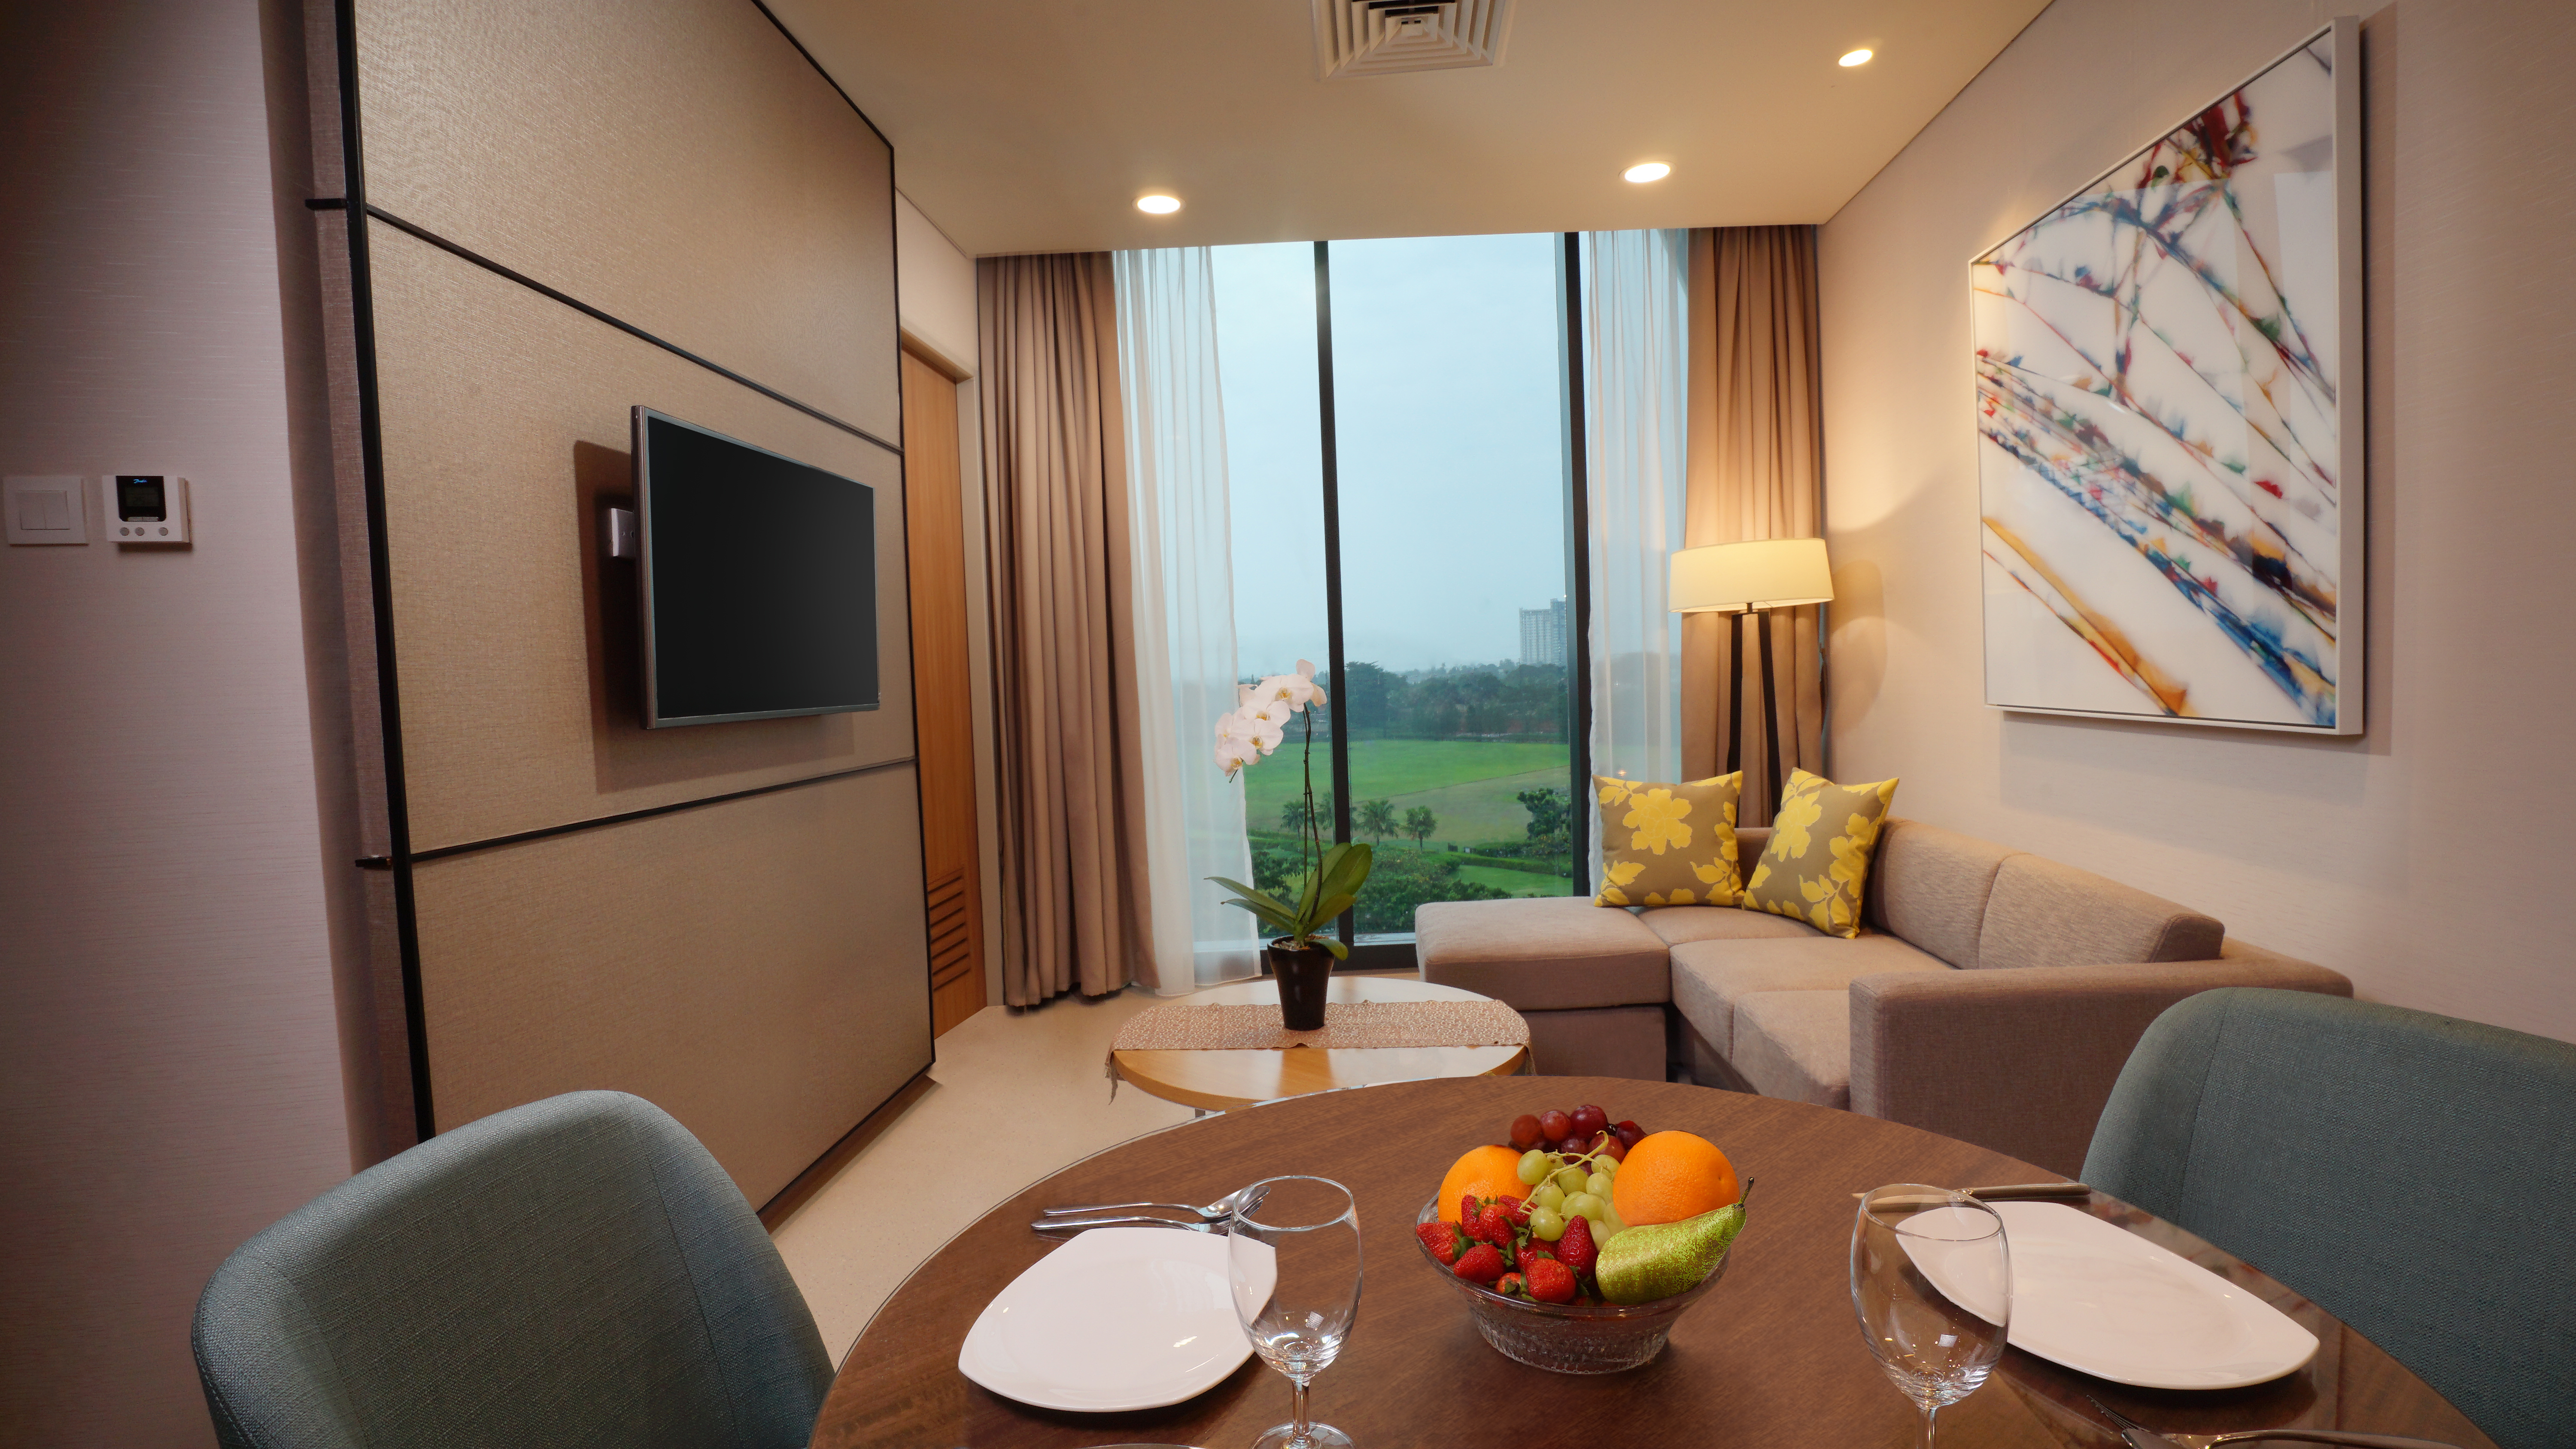 RS Pondok Indah Group's inpatient rooms offer serenity, privacy, and the comfort of service from a treatment room. 